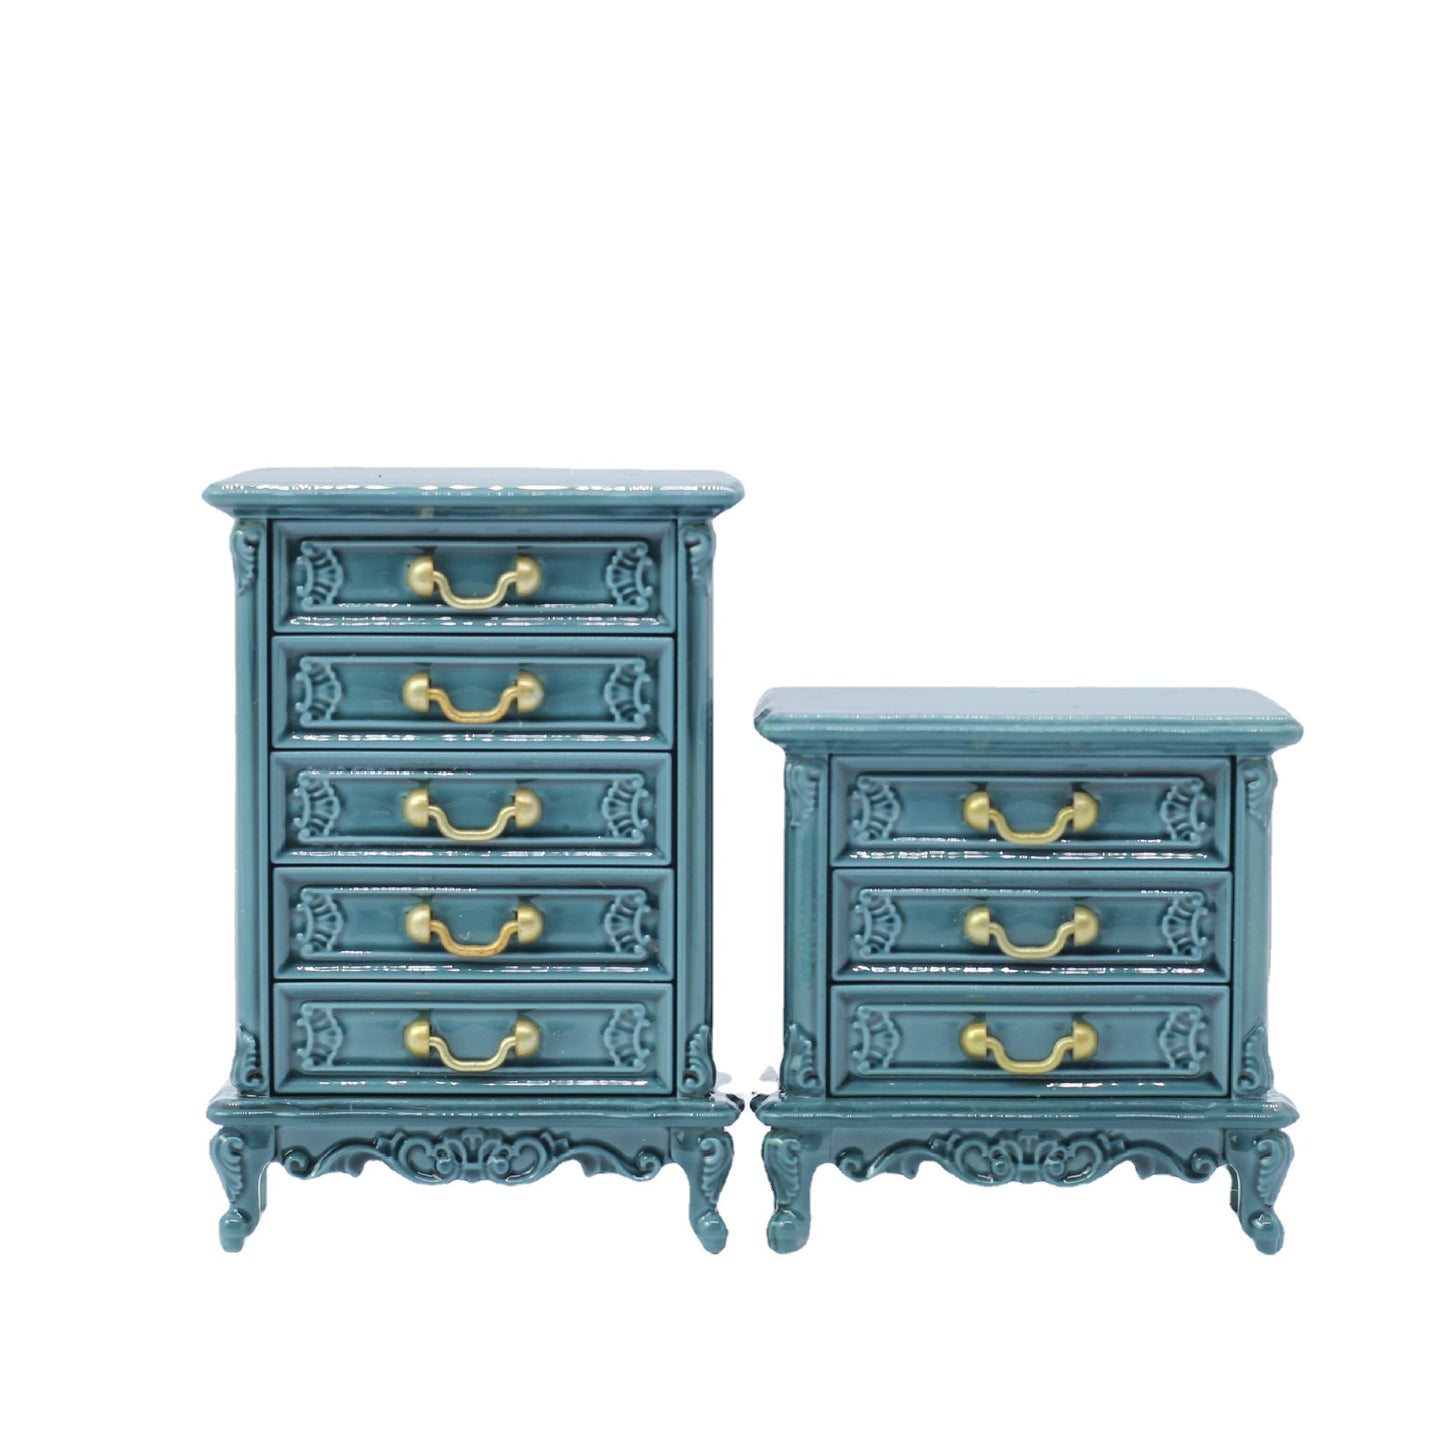 Chest of Drawers with opening Drawers two sizes